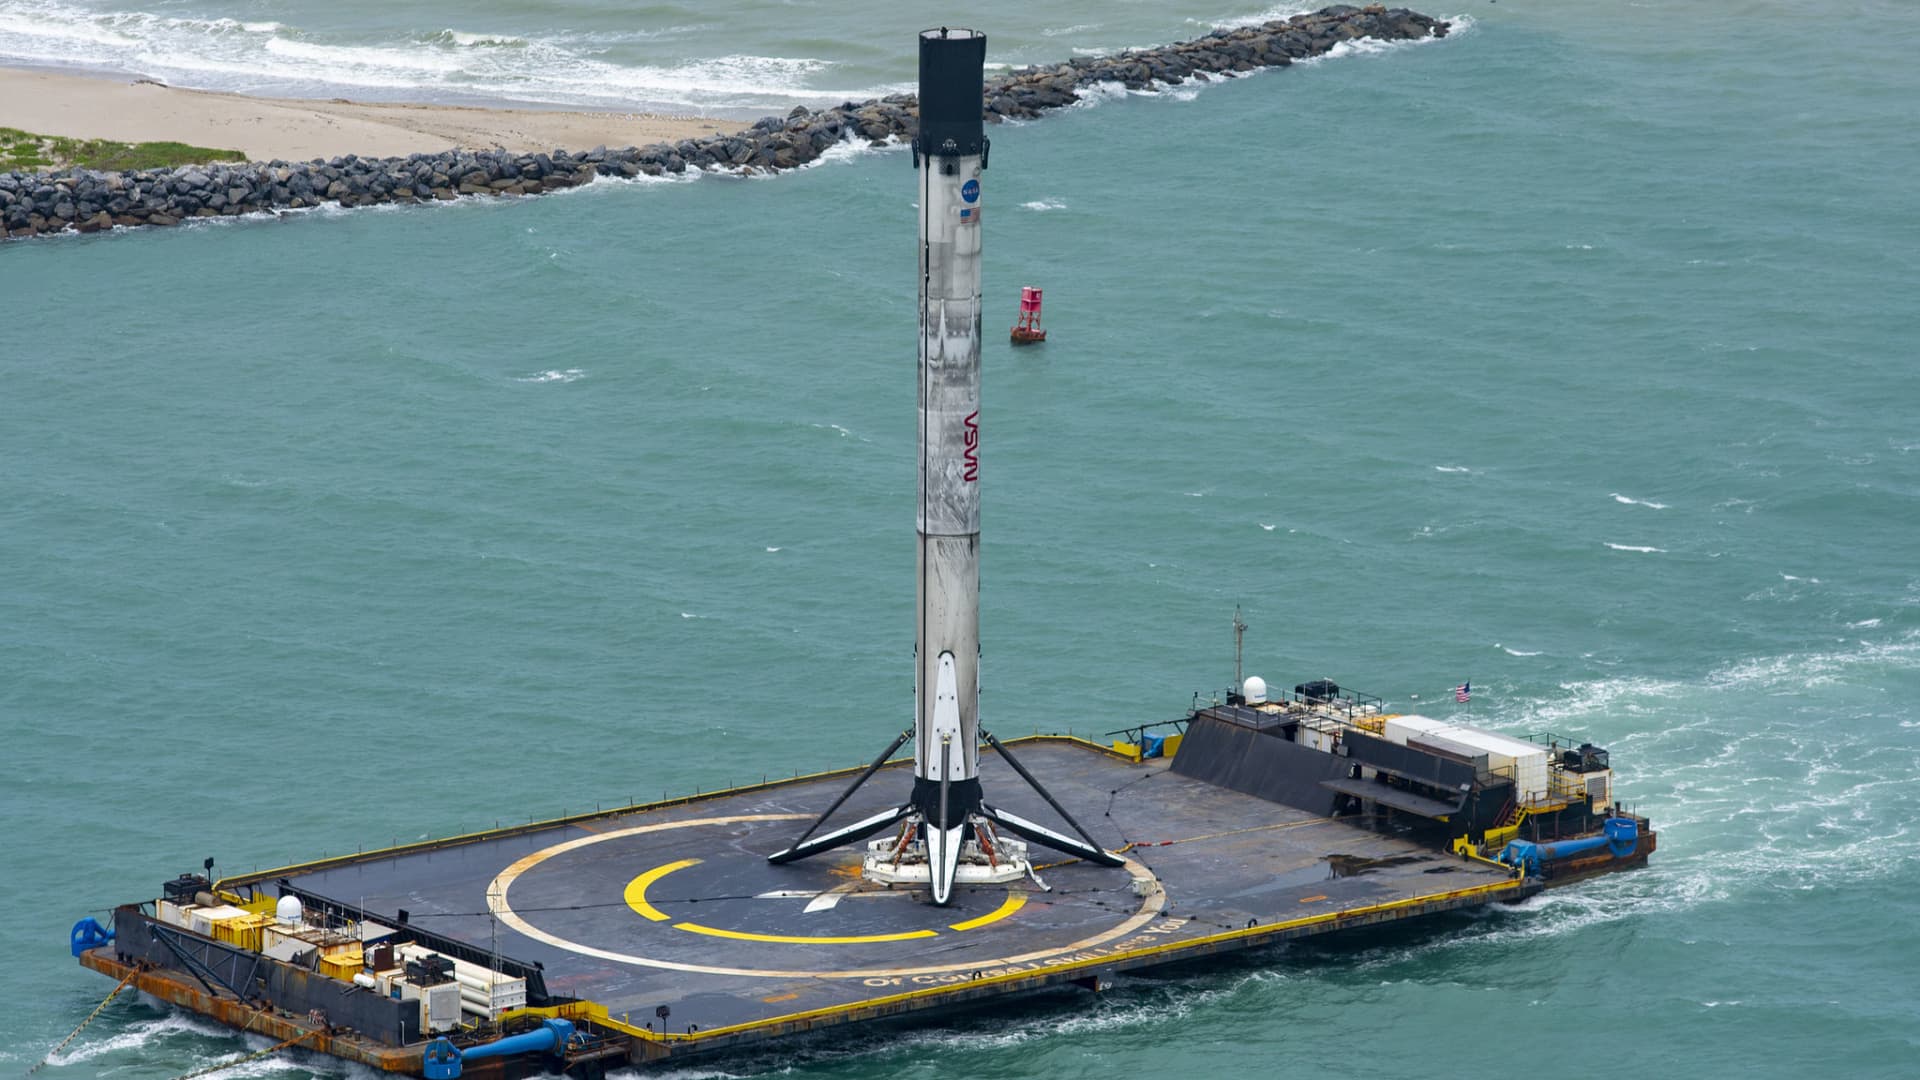 The landed Falcon 9 rocket booster from SpaceX's Demo-2 crewed mission returns to Port Canaveral in Florida.